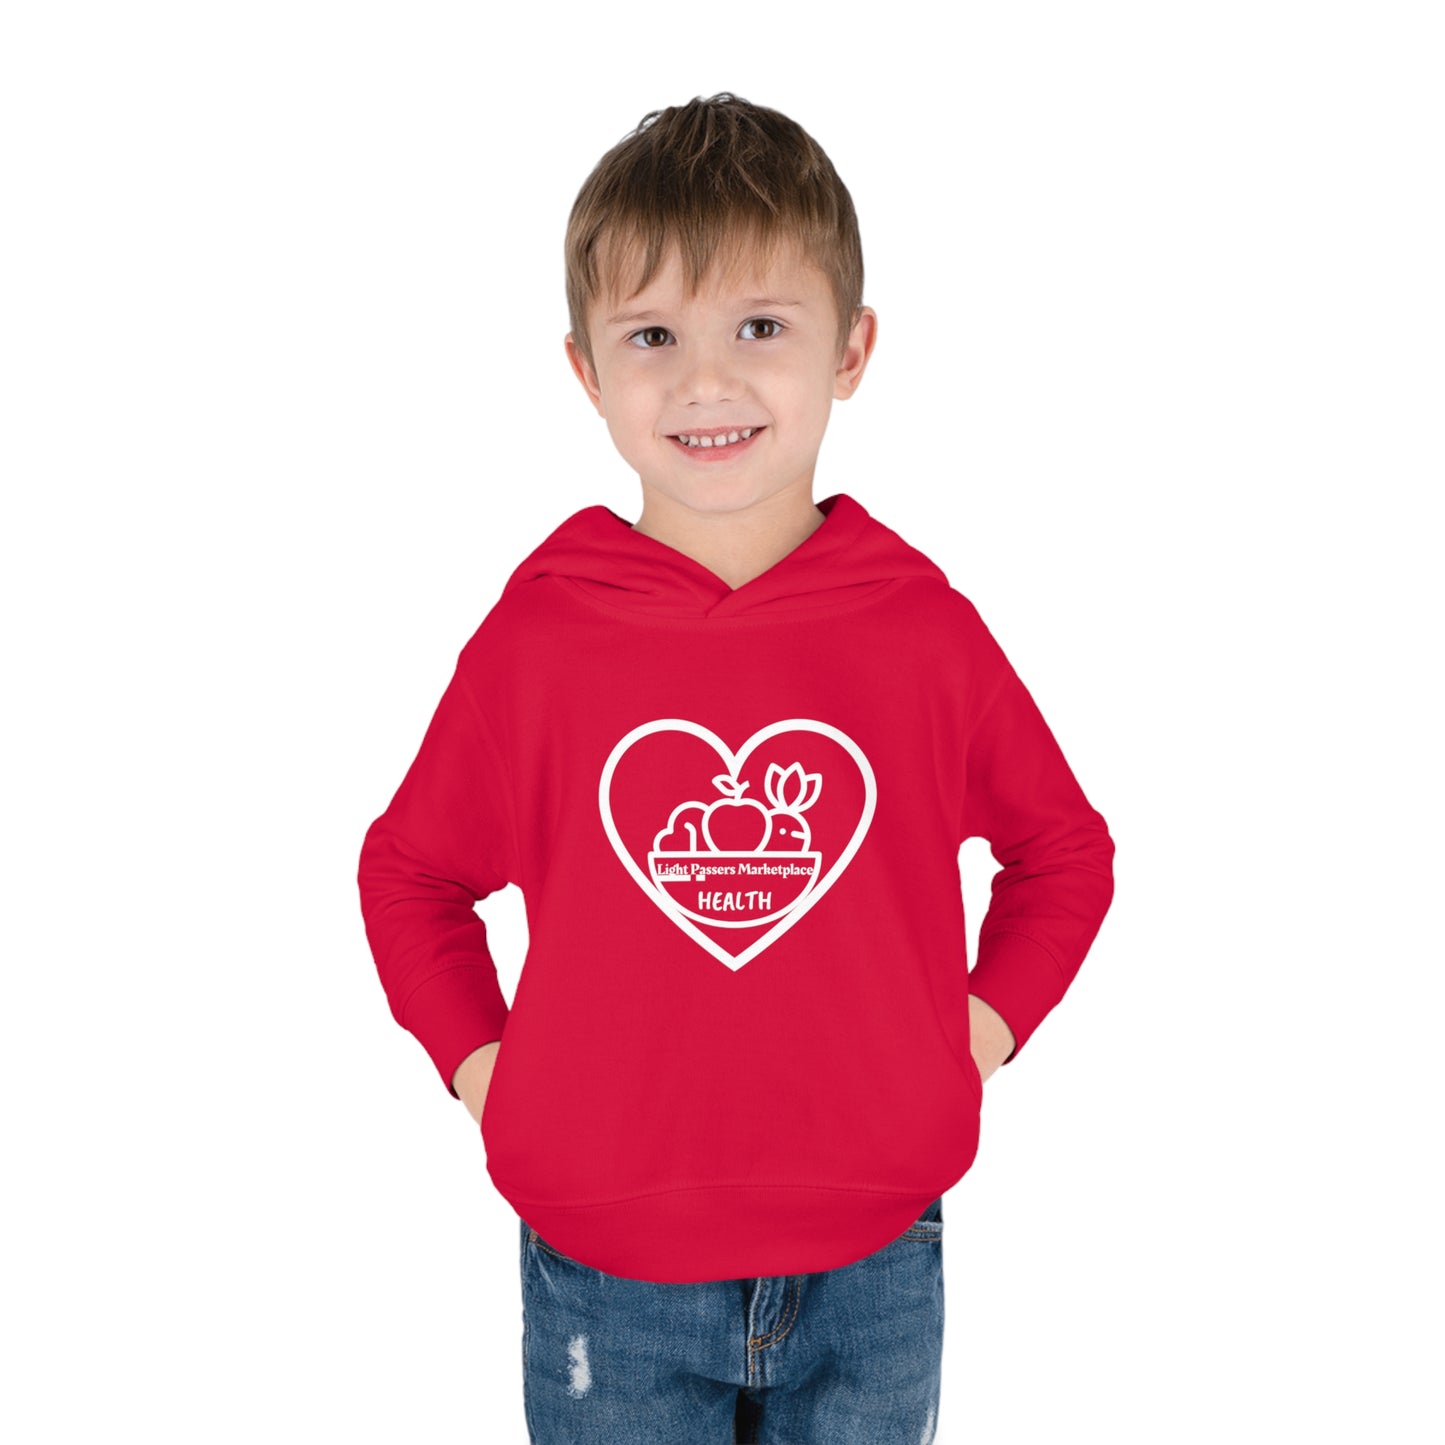 A toddler wearing a red Rabbit Skins hoodie with side seam pockets, jersey-lined hood, and cover-stitched details for durability and comfort.